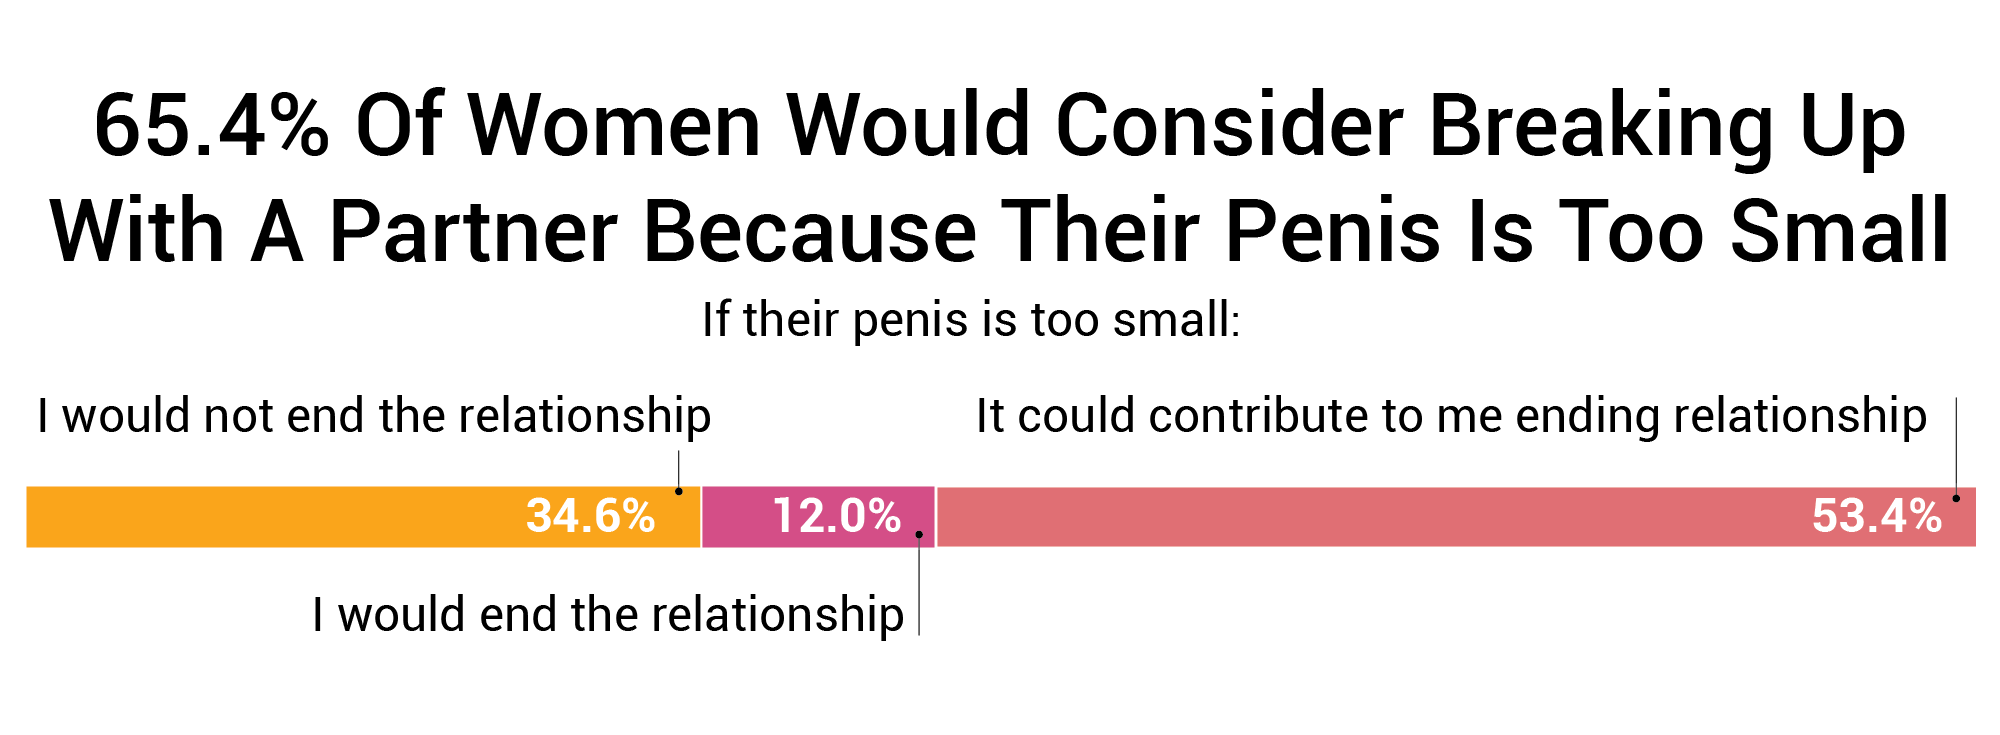 65.4-Of-Women-Would-Consider-Breaking-Up-With-A-Partner-Because-Their-Penis-Is-Too-Small.png